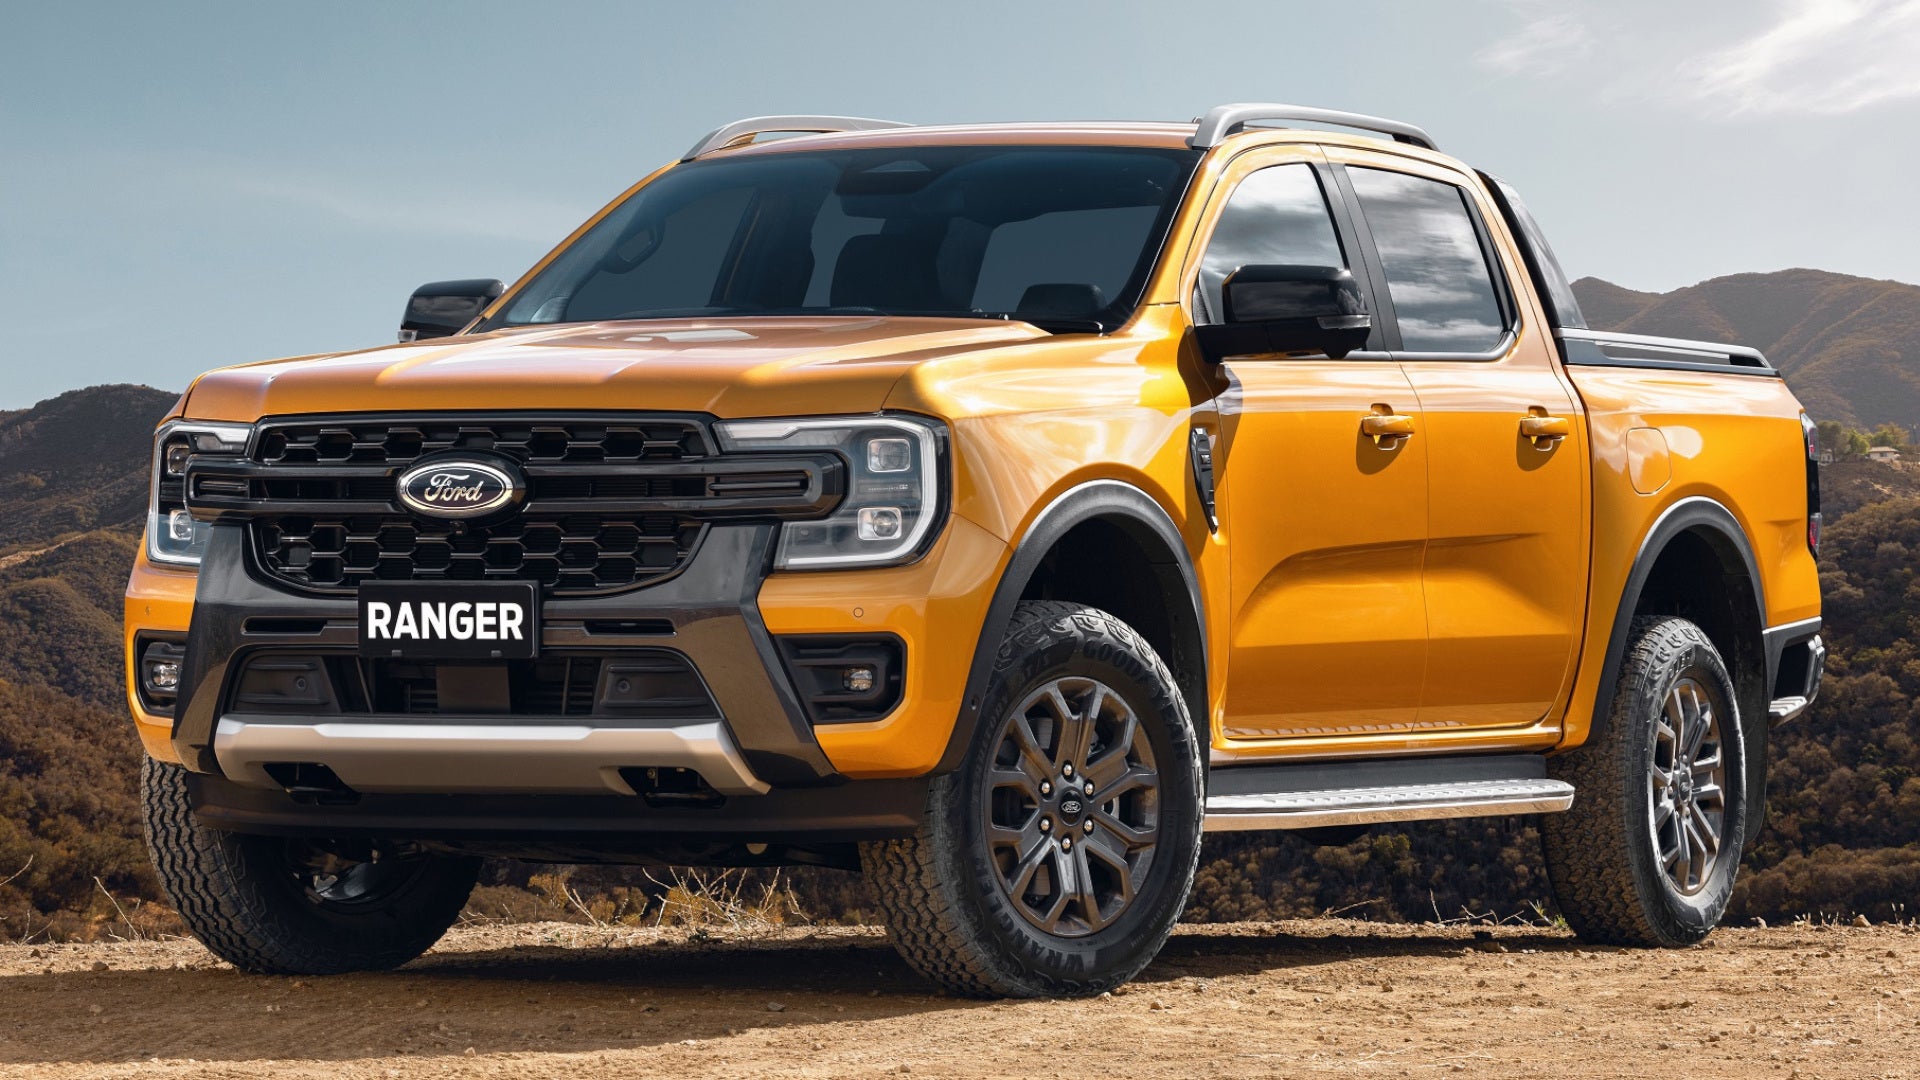 This Is the Next-Gen Ford Ranger